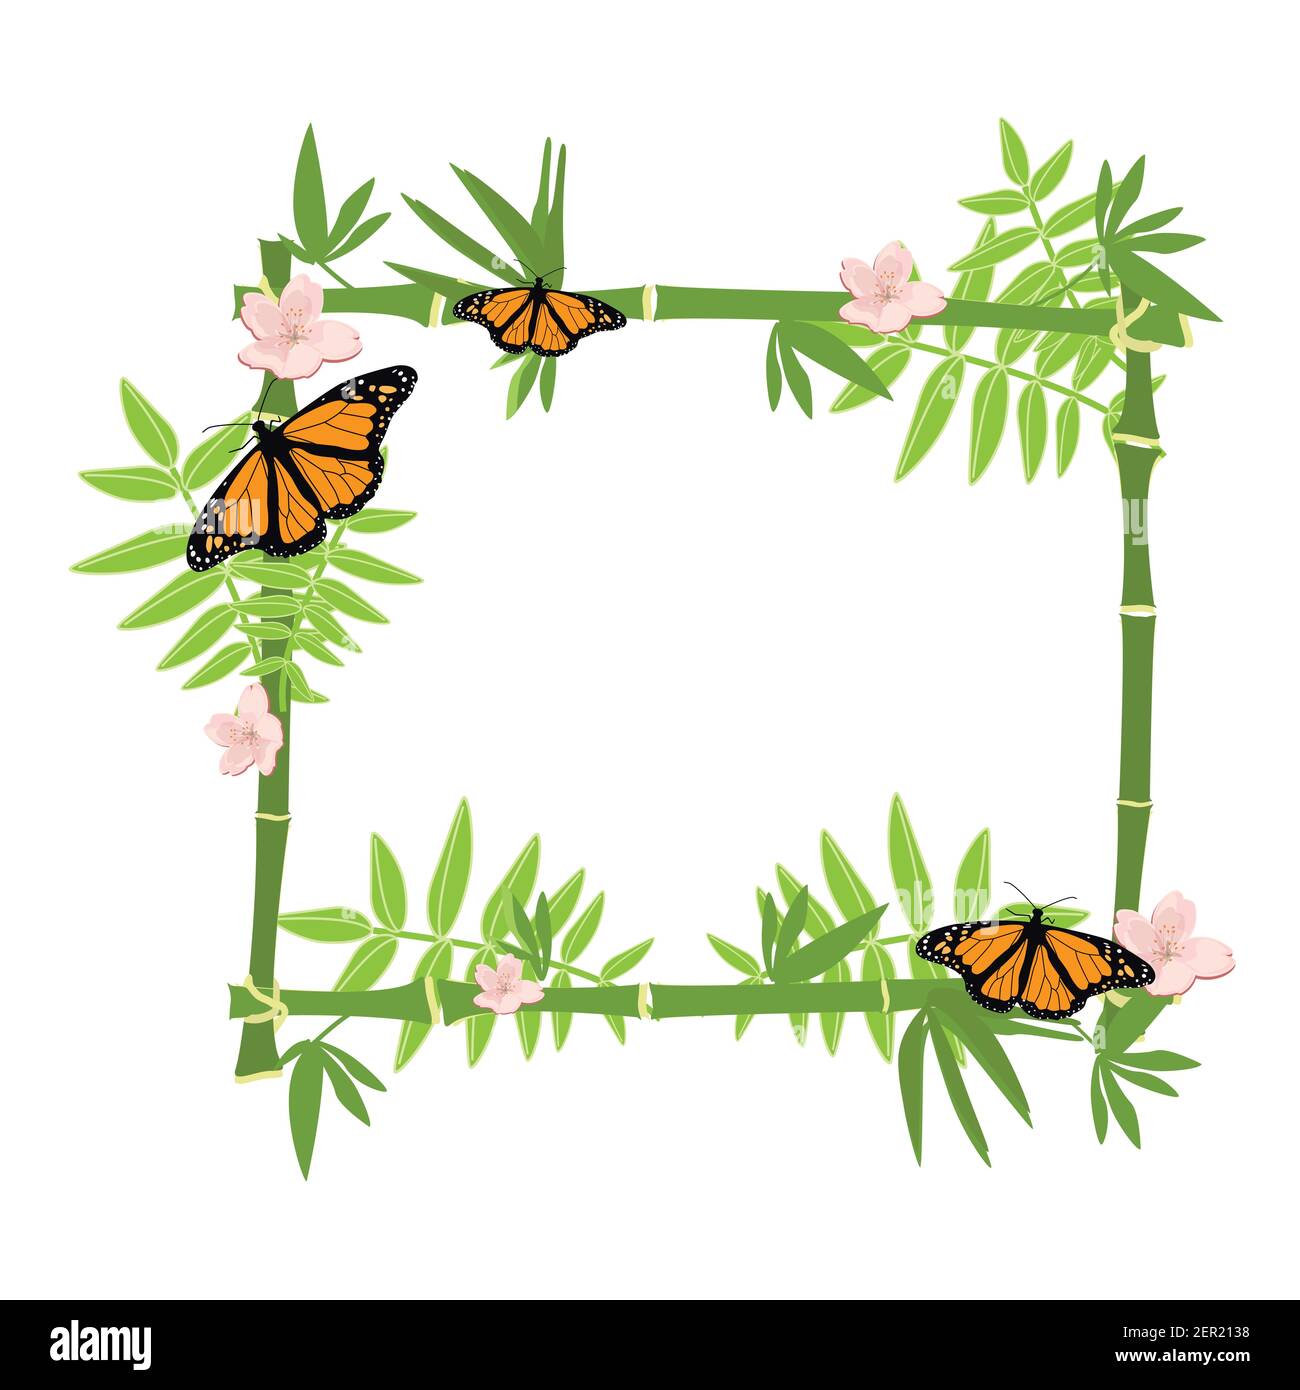 https://c8.alamy.com/comp/2ER2138/vector-illustration-tropical-island-frame-border-poster-with-exotic-flowers-butterflies-and-plants-bamboo-frame-monarch-butterfly-2ER2138.jpg